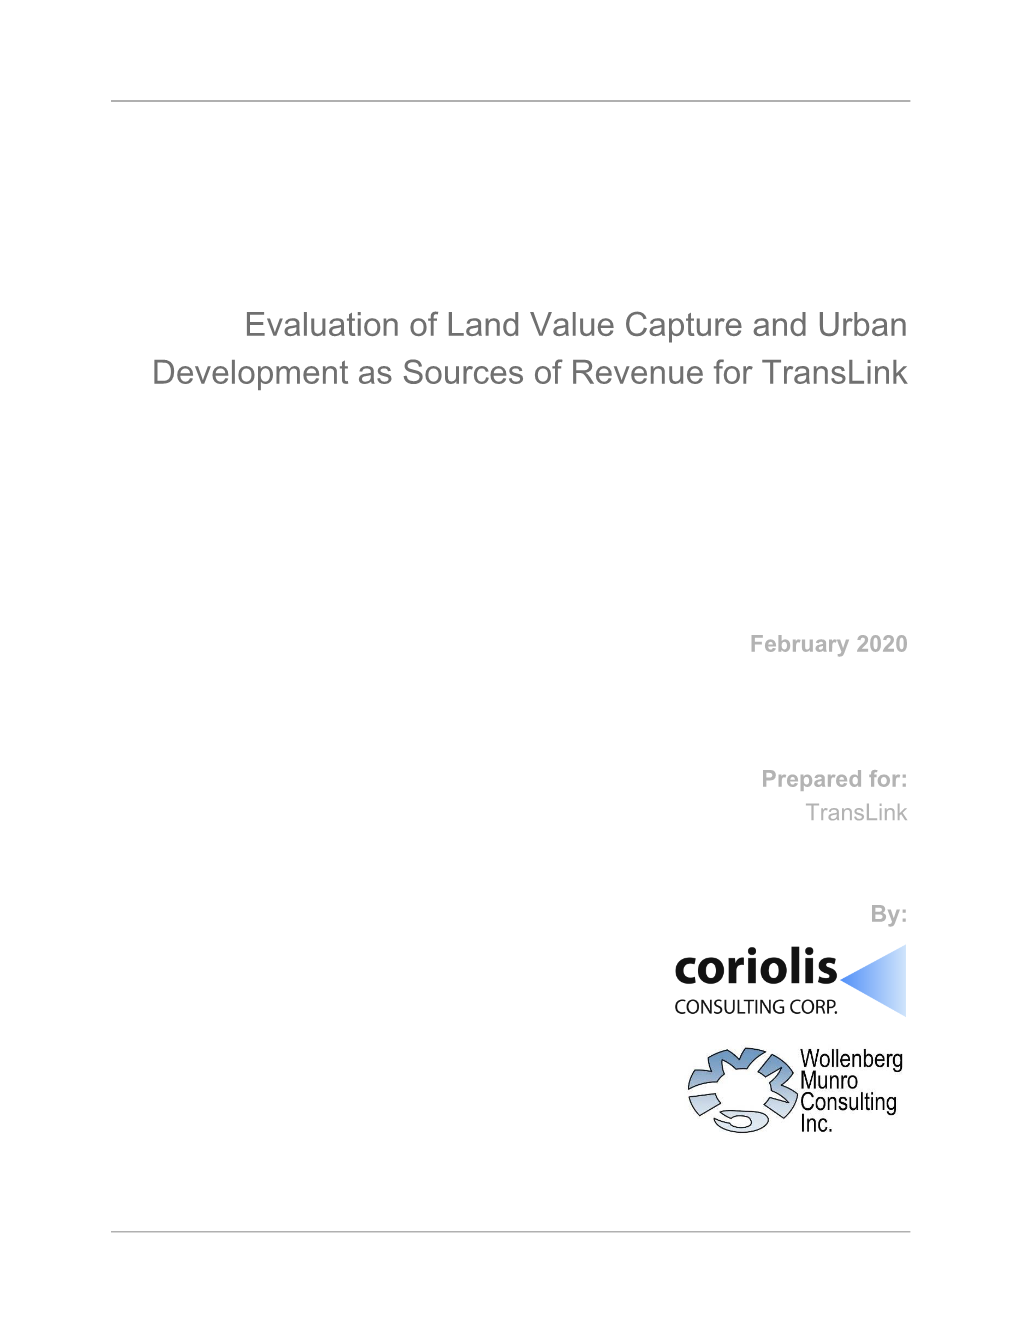 Evaluation of Land Value Capture and Urban Development As Sources of Revenue for Translink